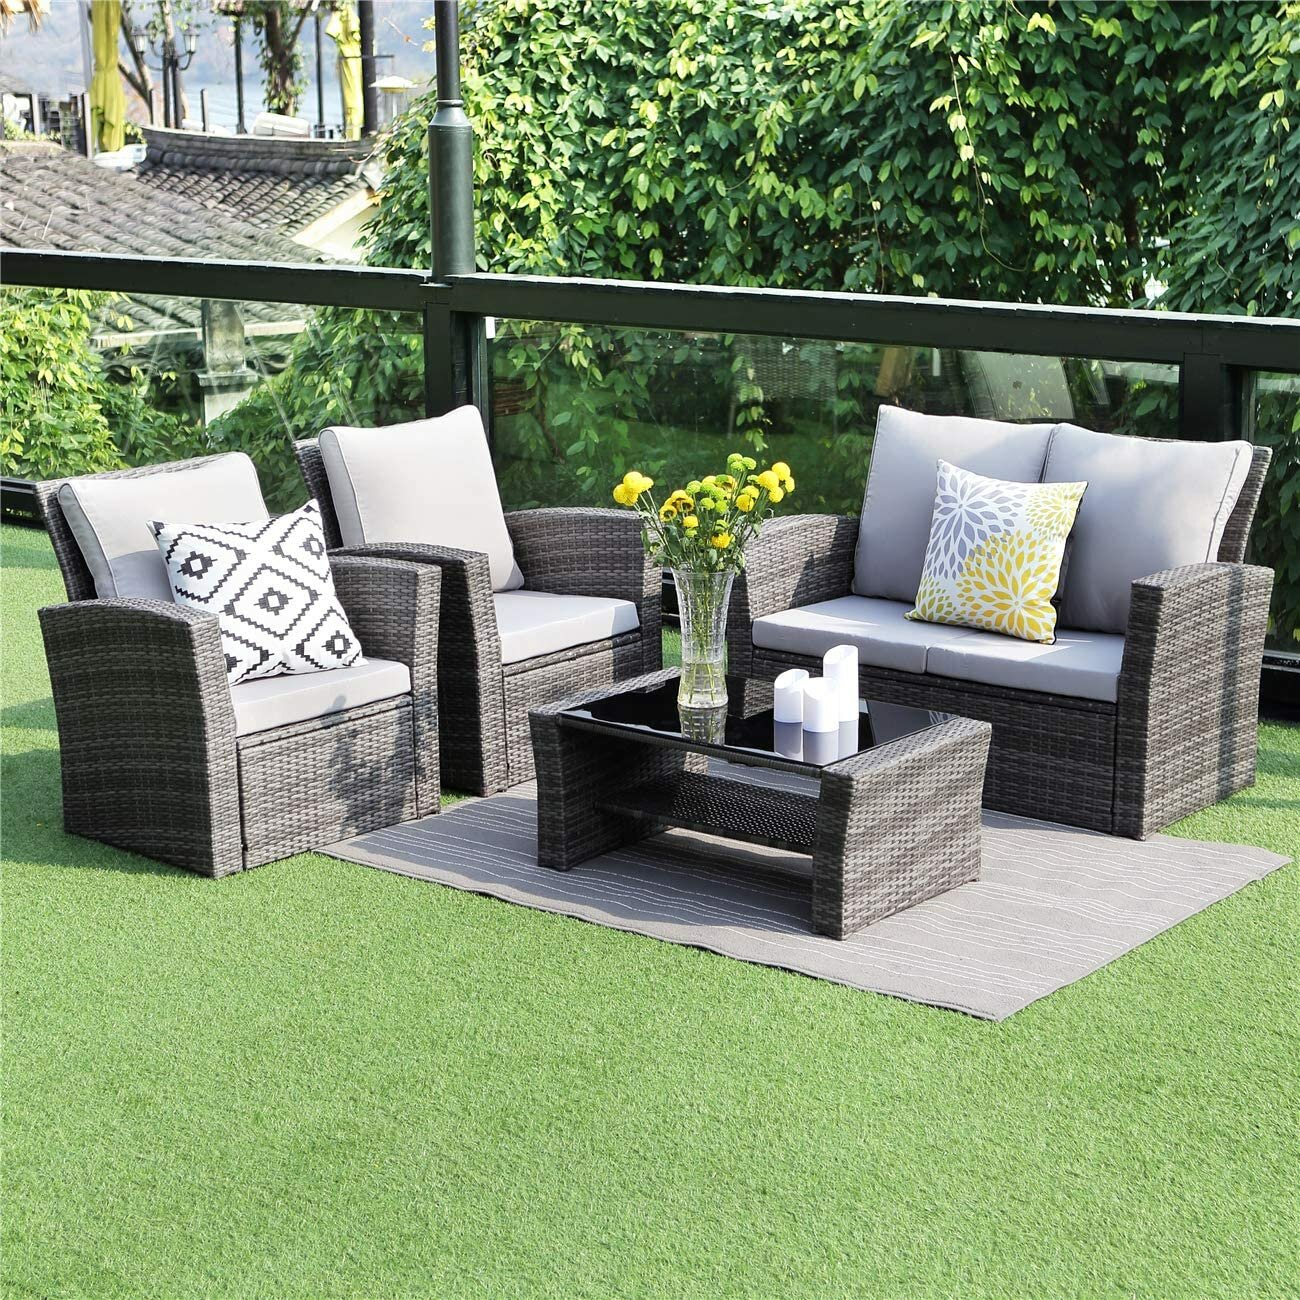 Netherside Wicker/Rattan 4 - Person Seating Group with Cushions, 2 Chair: Yes, Upgraded comfort: This contemporary outdoor sectional sofa comes with thick lofty sponge padded water-resistant - image 2 of 7